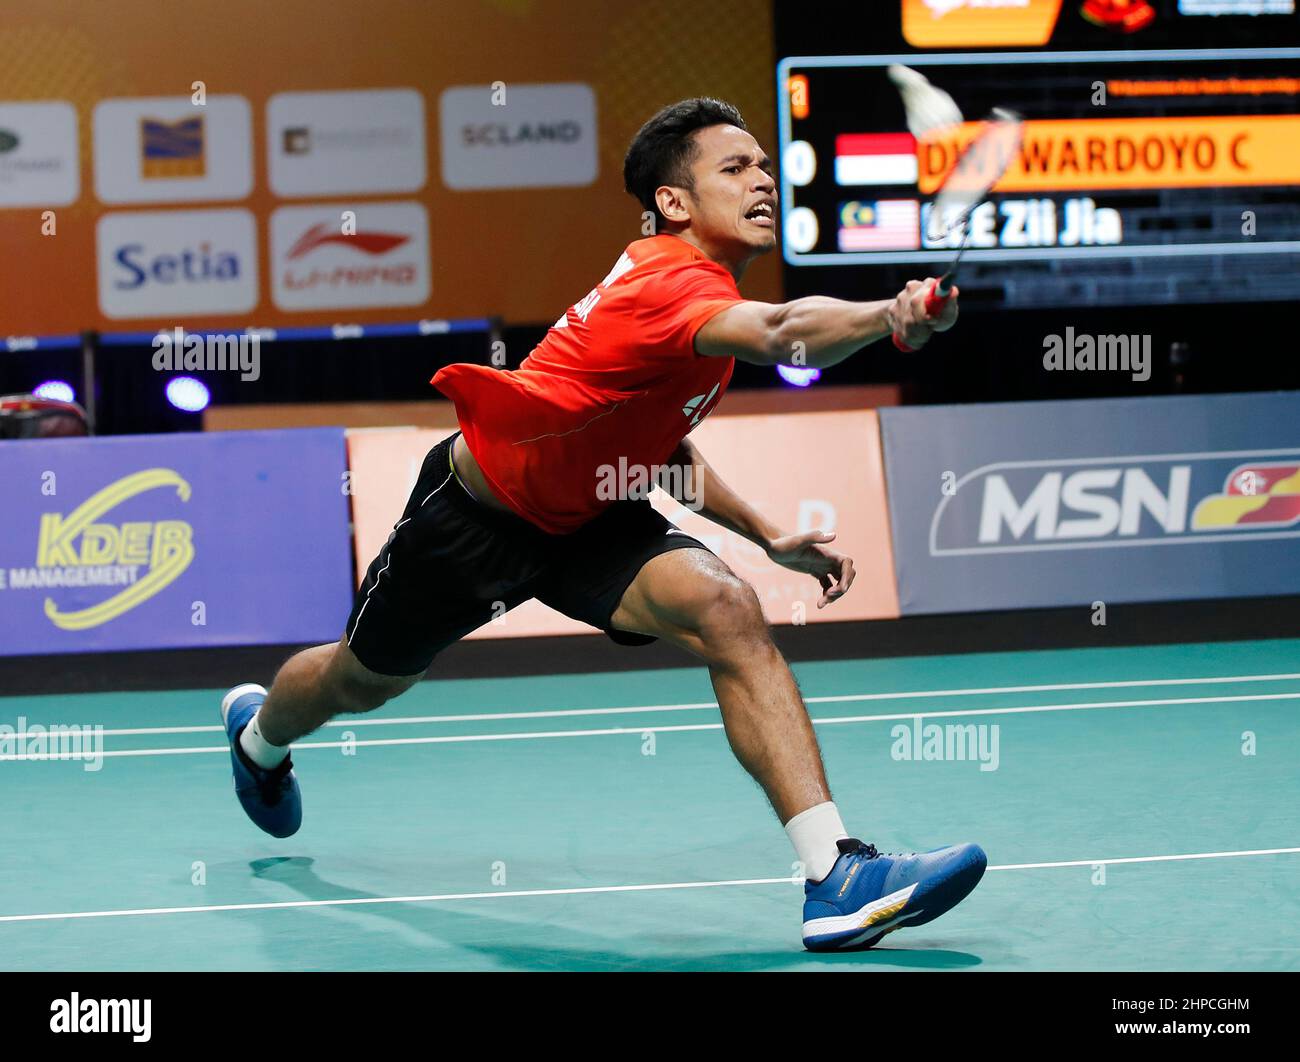 Kuala Lumpur, Malaysia. 20th Feb, 2022. Dwi Wardoyo Chico Aura of Indonesia  plays against Lee Zii Jia of Malaysia during the final of the team men's  singles match at the Badminton Asia